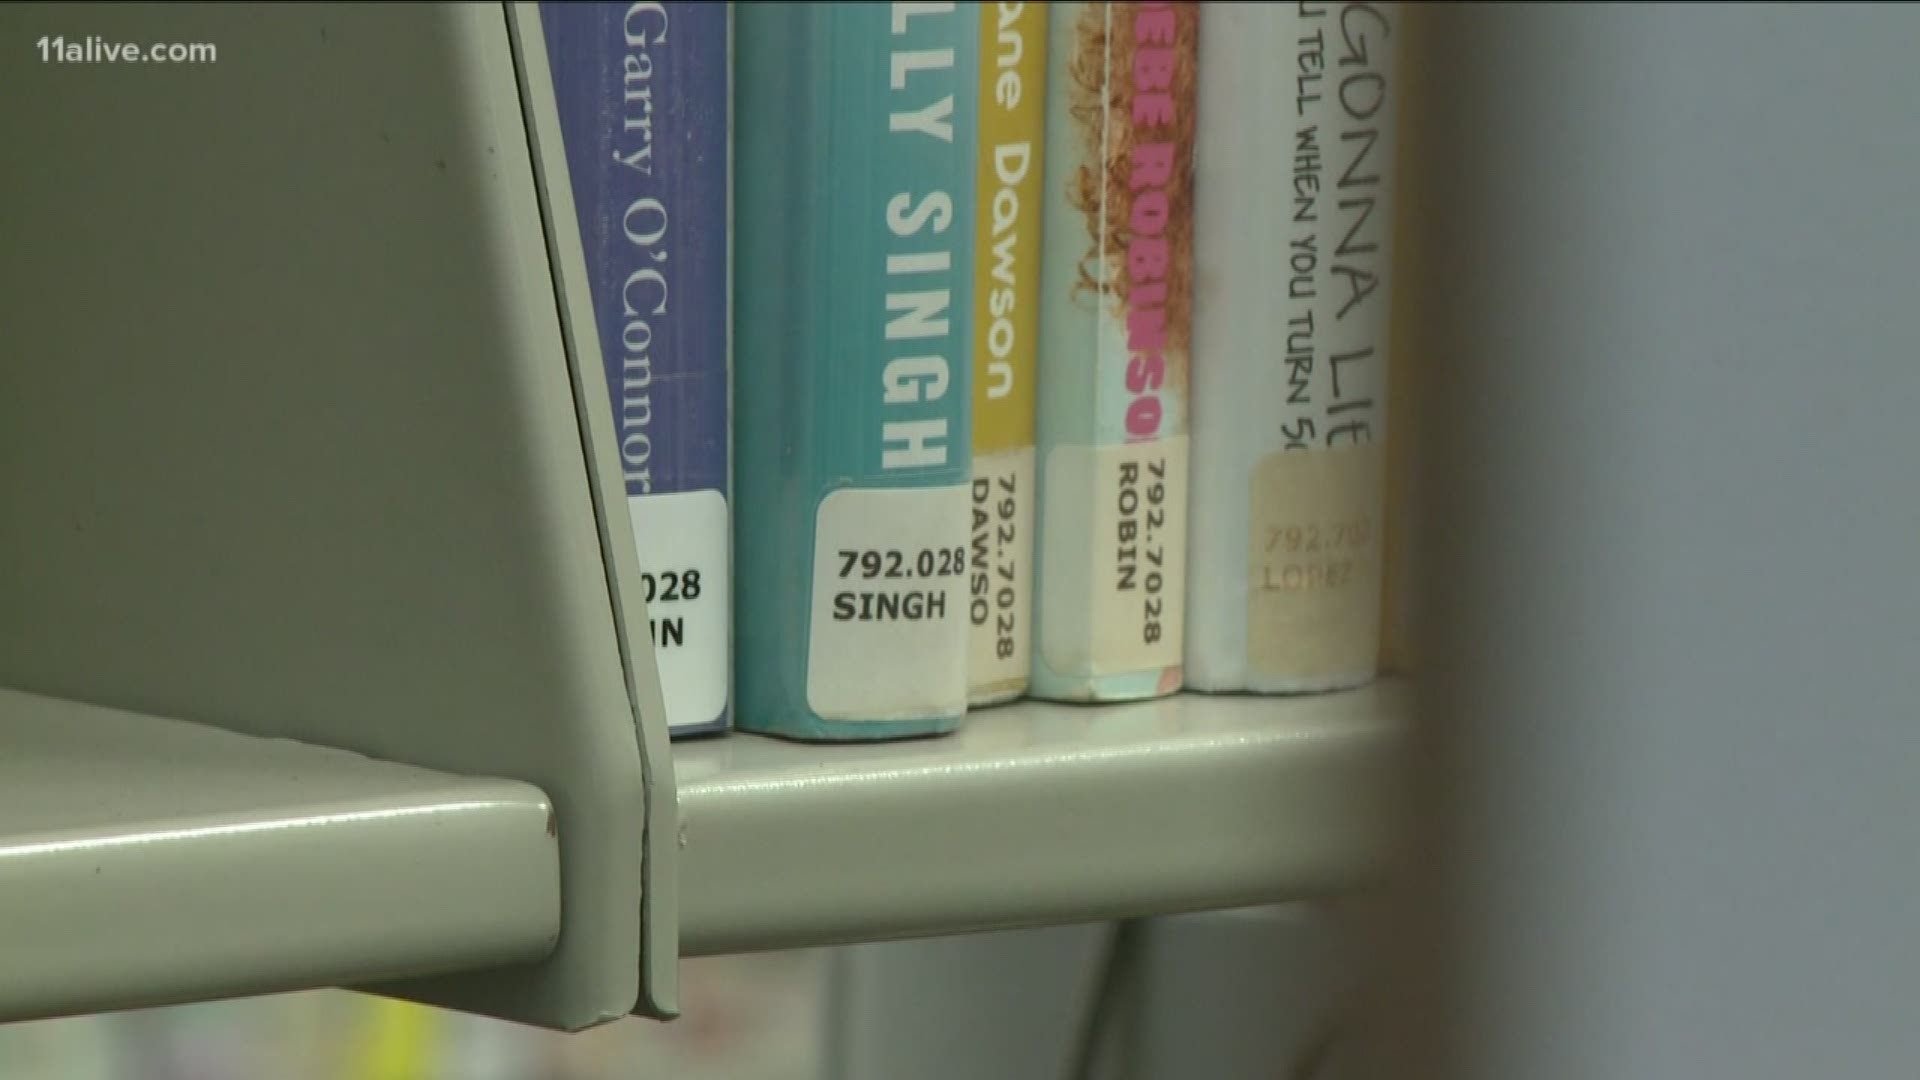 Gwinnett County libraries will be closed several days this week as they move away from the Dewey Decimal System.